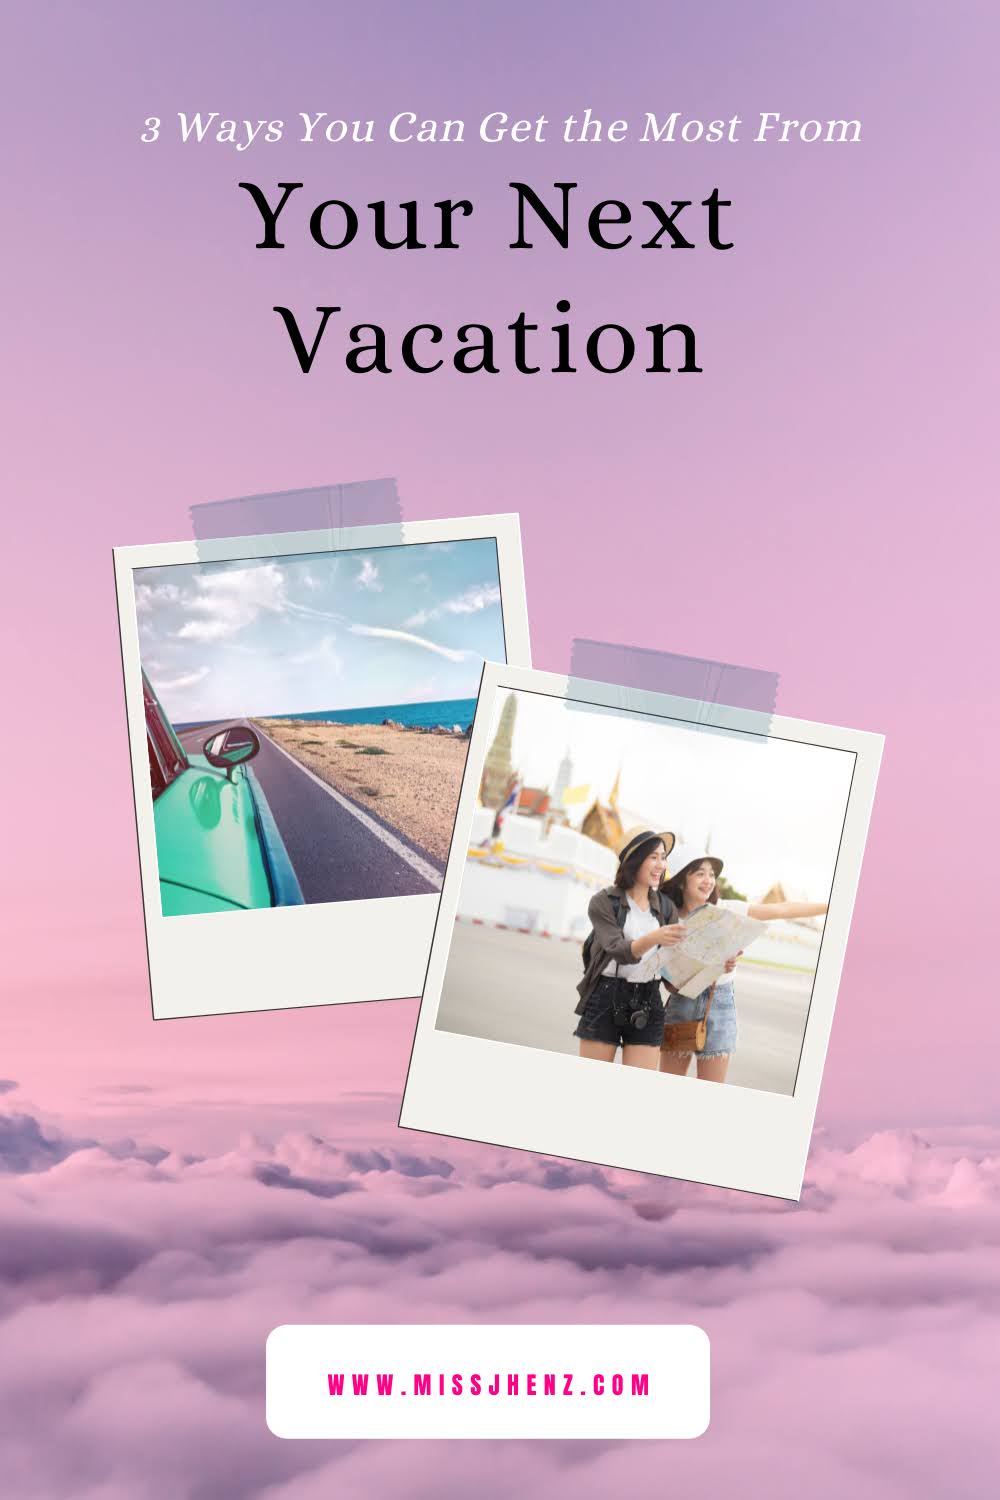 3 Ways You Can Get the Most From Your Next Vacation